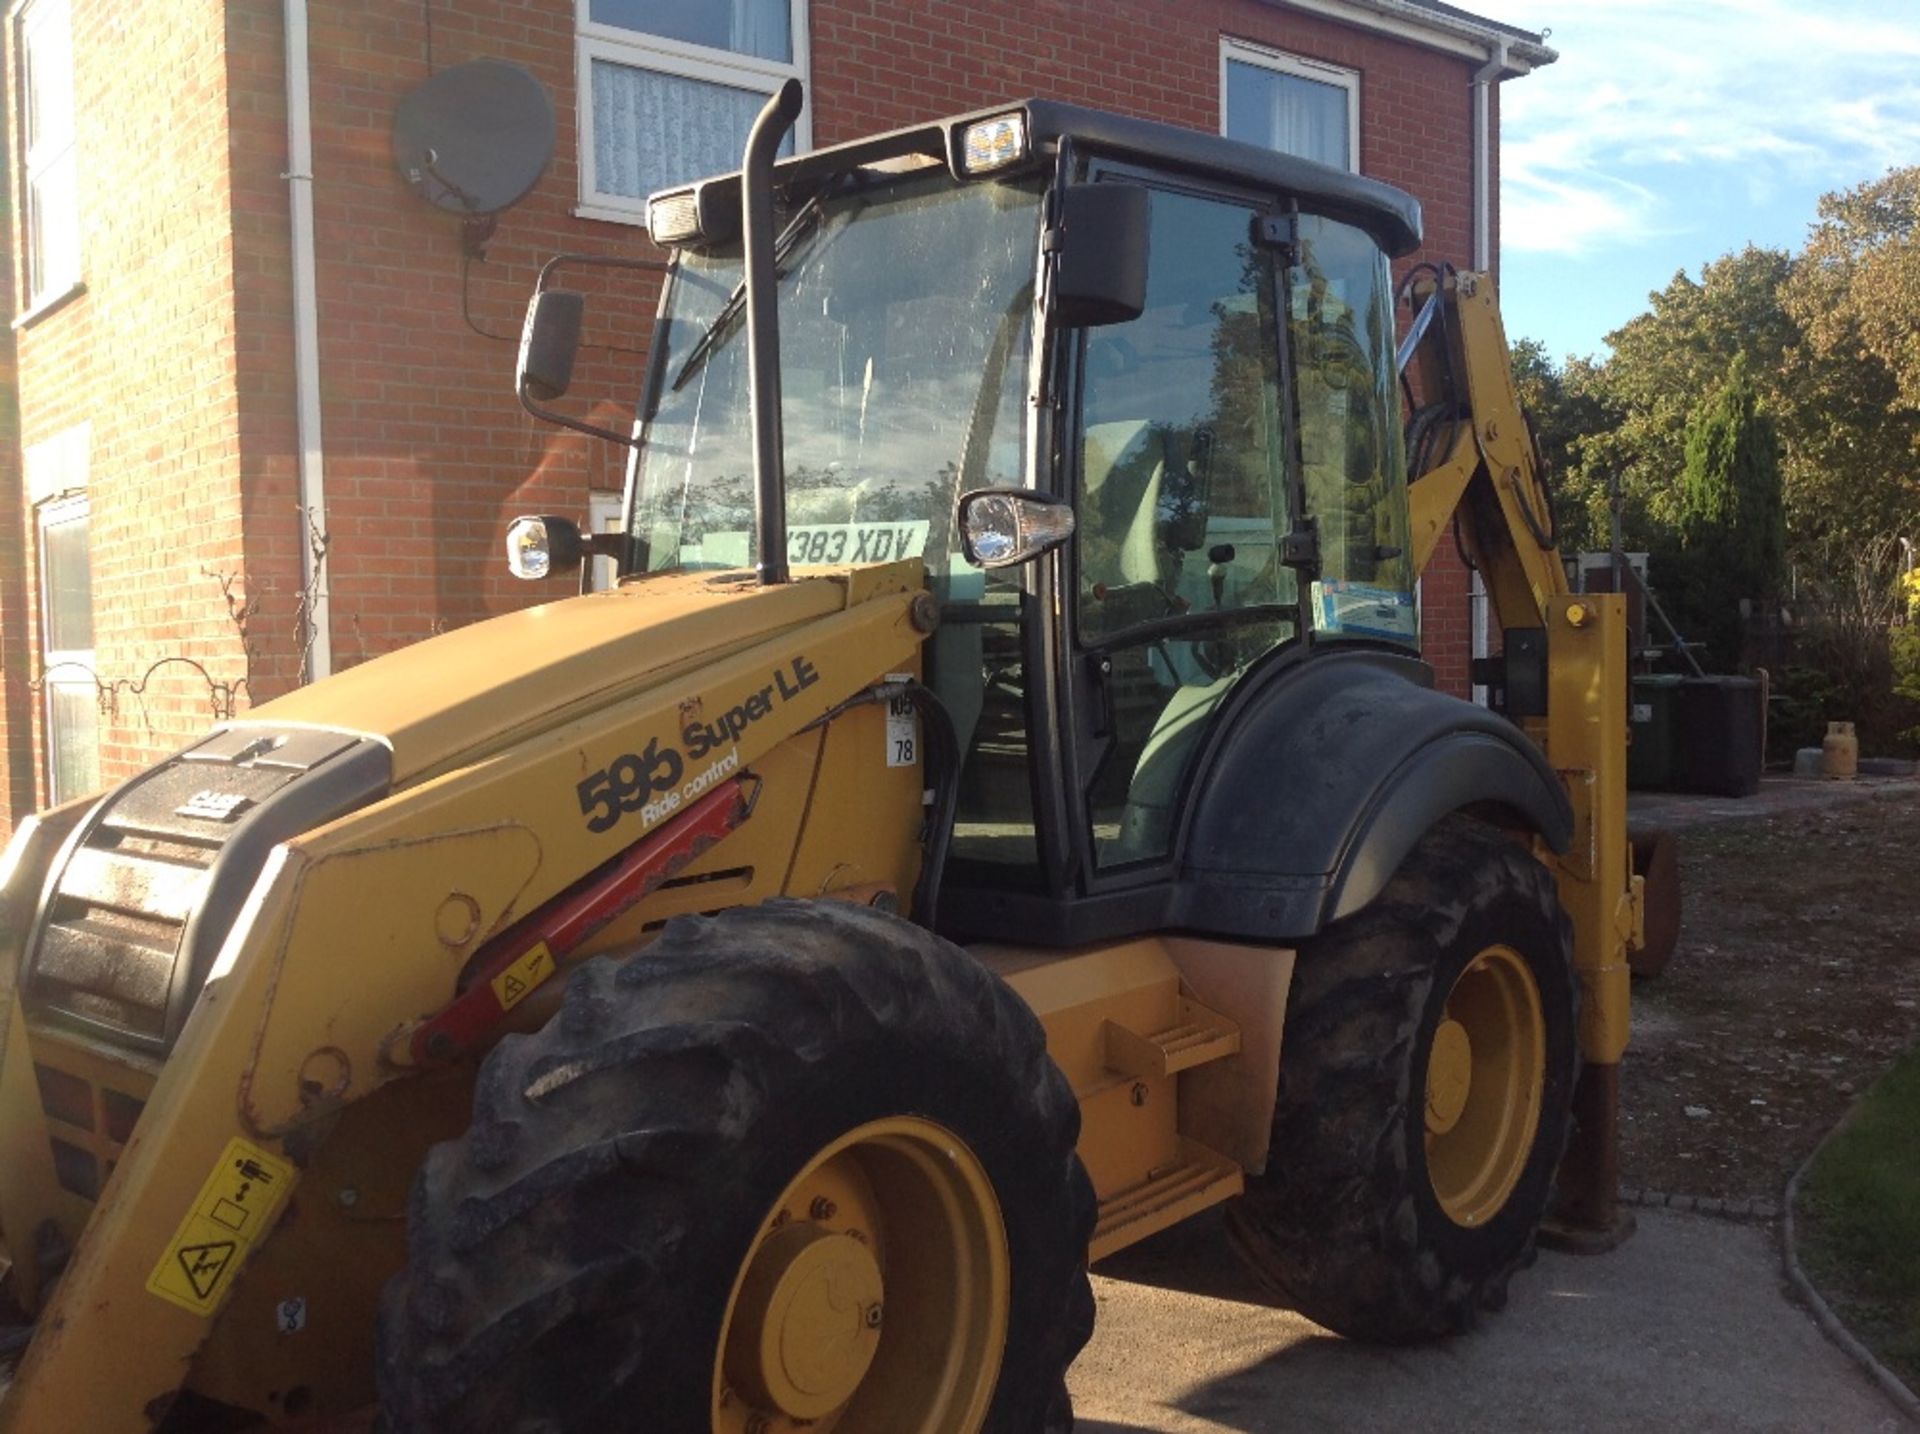 Case 595SLE Backhoe Loader, 4 in 1 front bucket with forks, telescopic rear dipper with 3 buckets, - Bild 2 aus 4